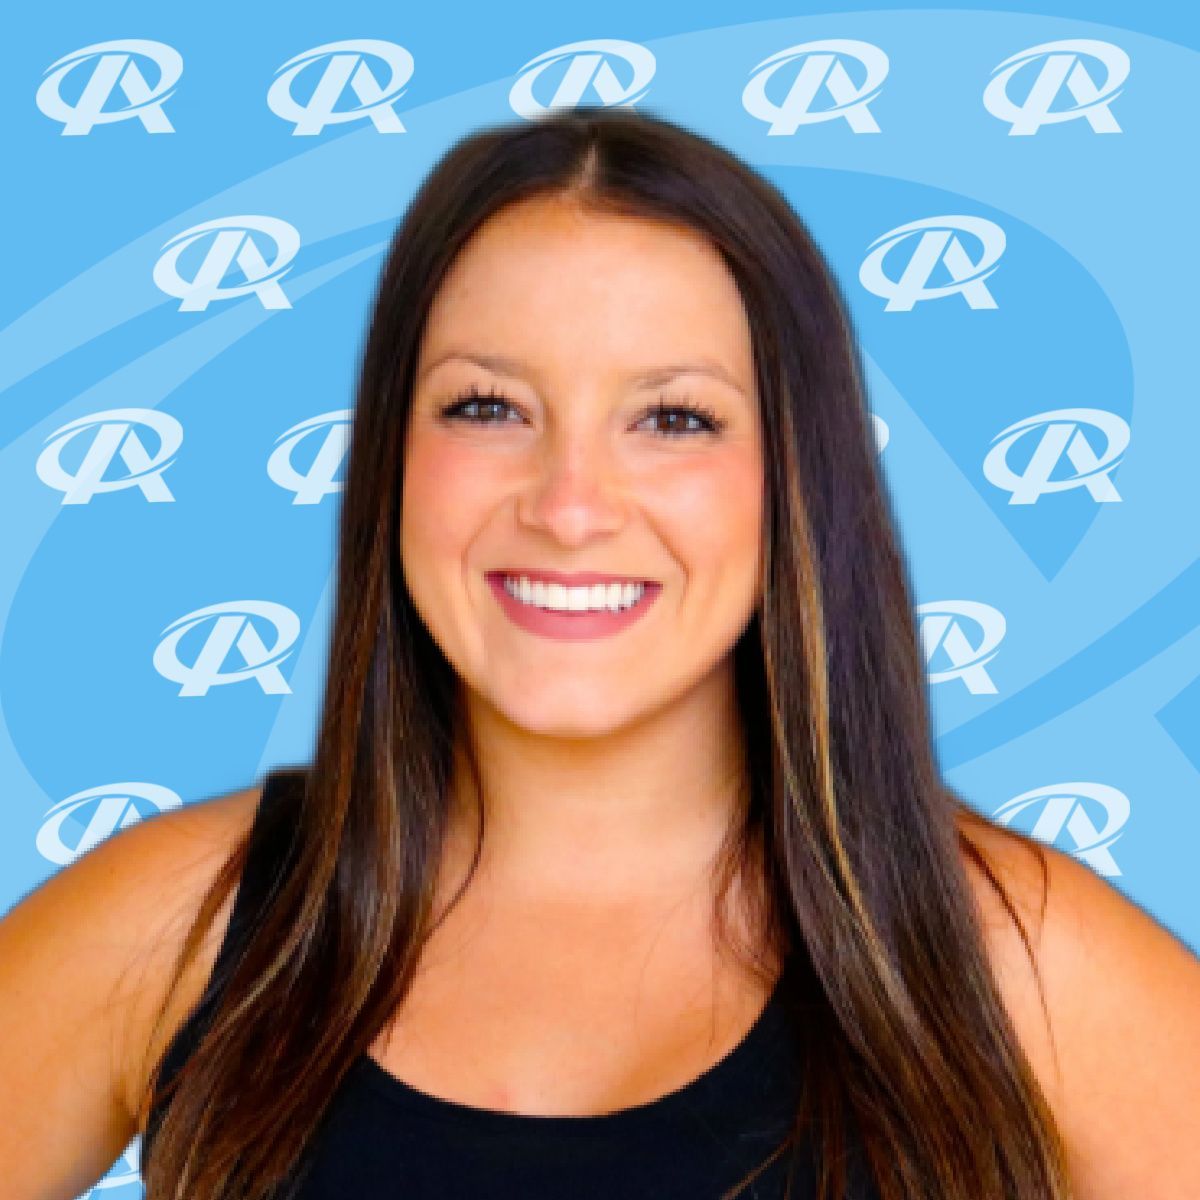 A woman in a black tank top is smiling in front of a blue background with the letter r on it